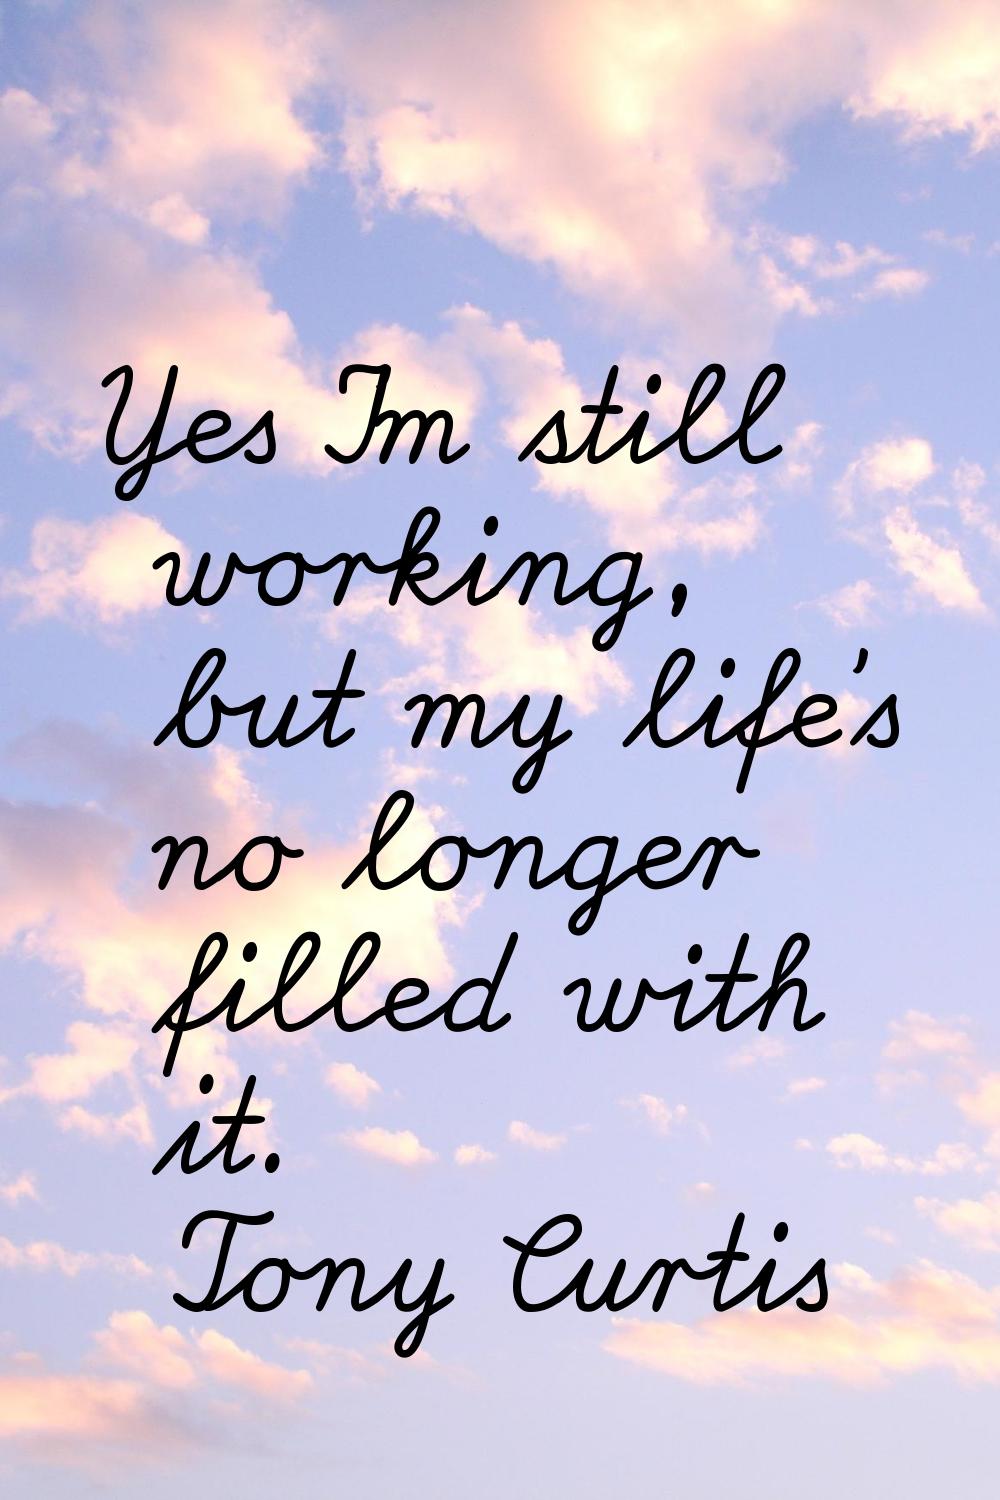 Yes I'm still working, but my life's no longer filled with it.